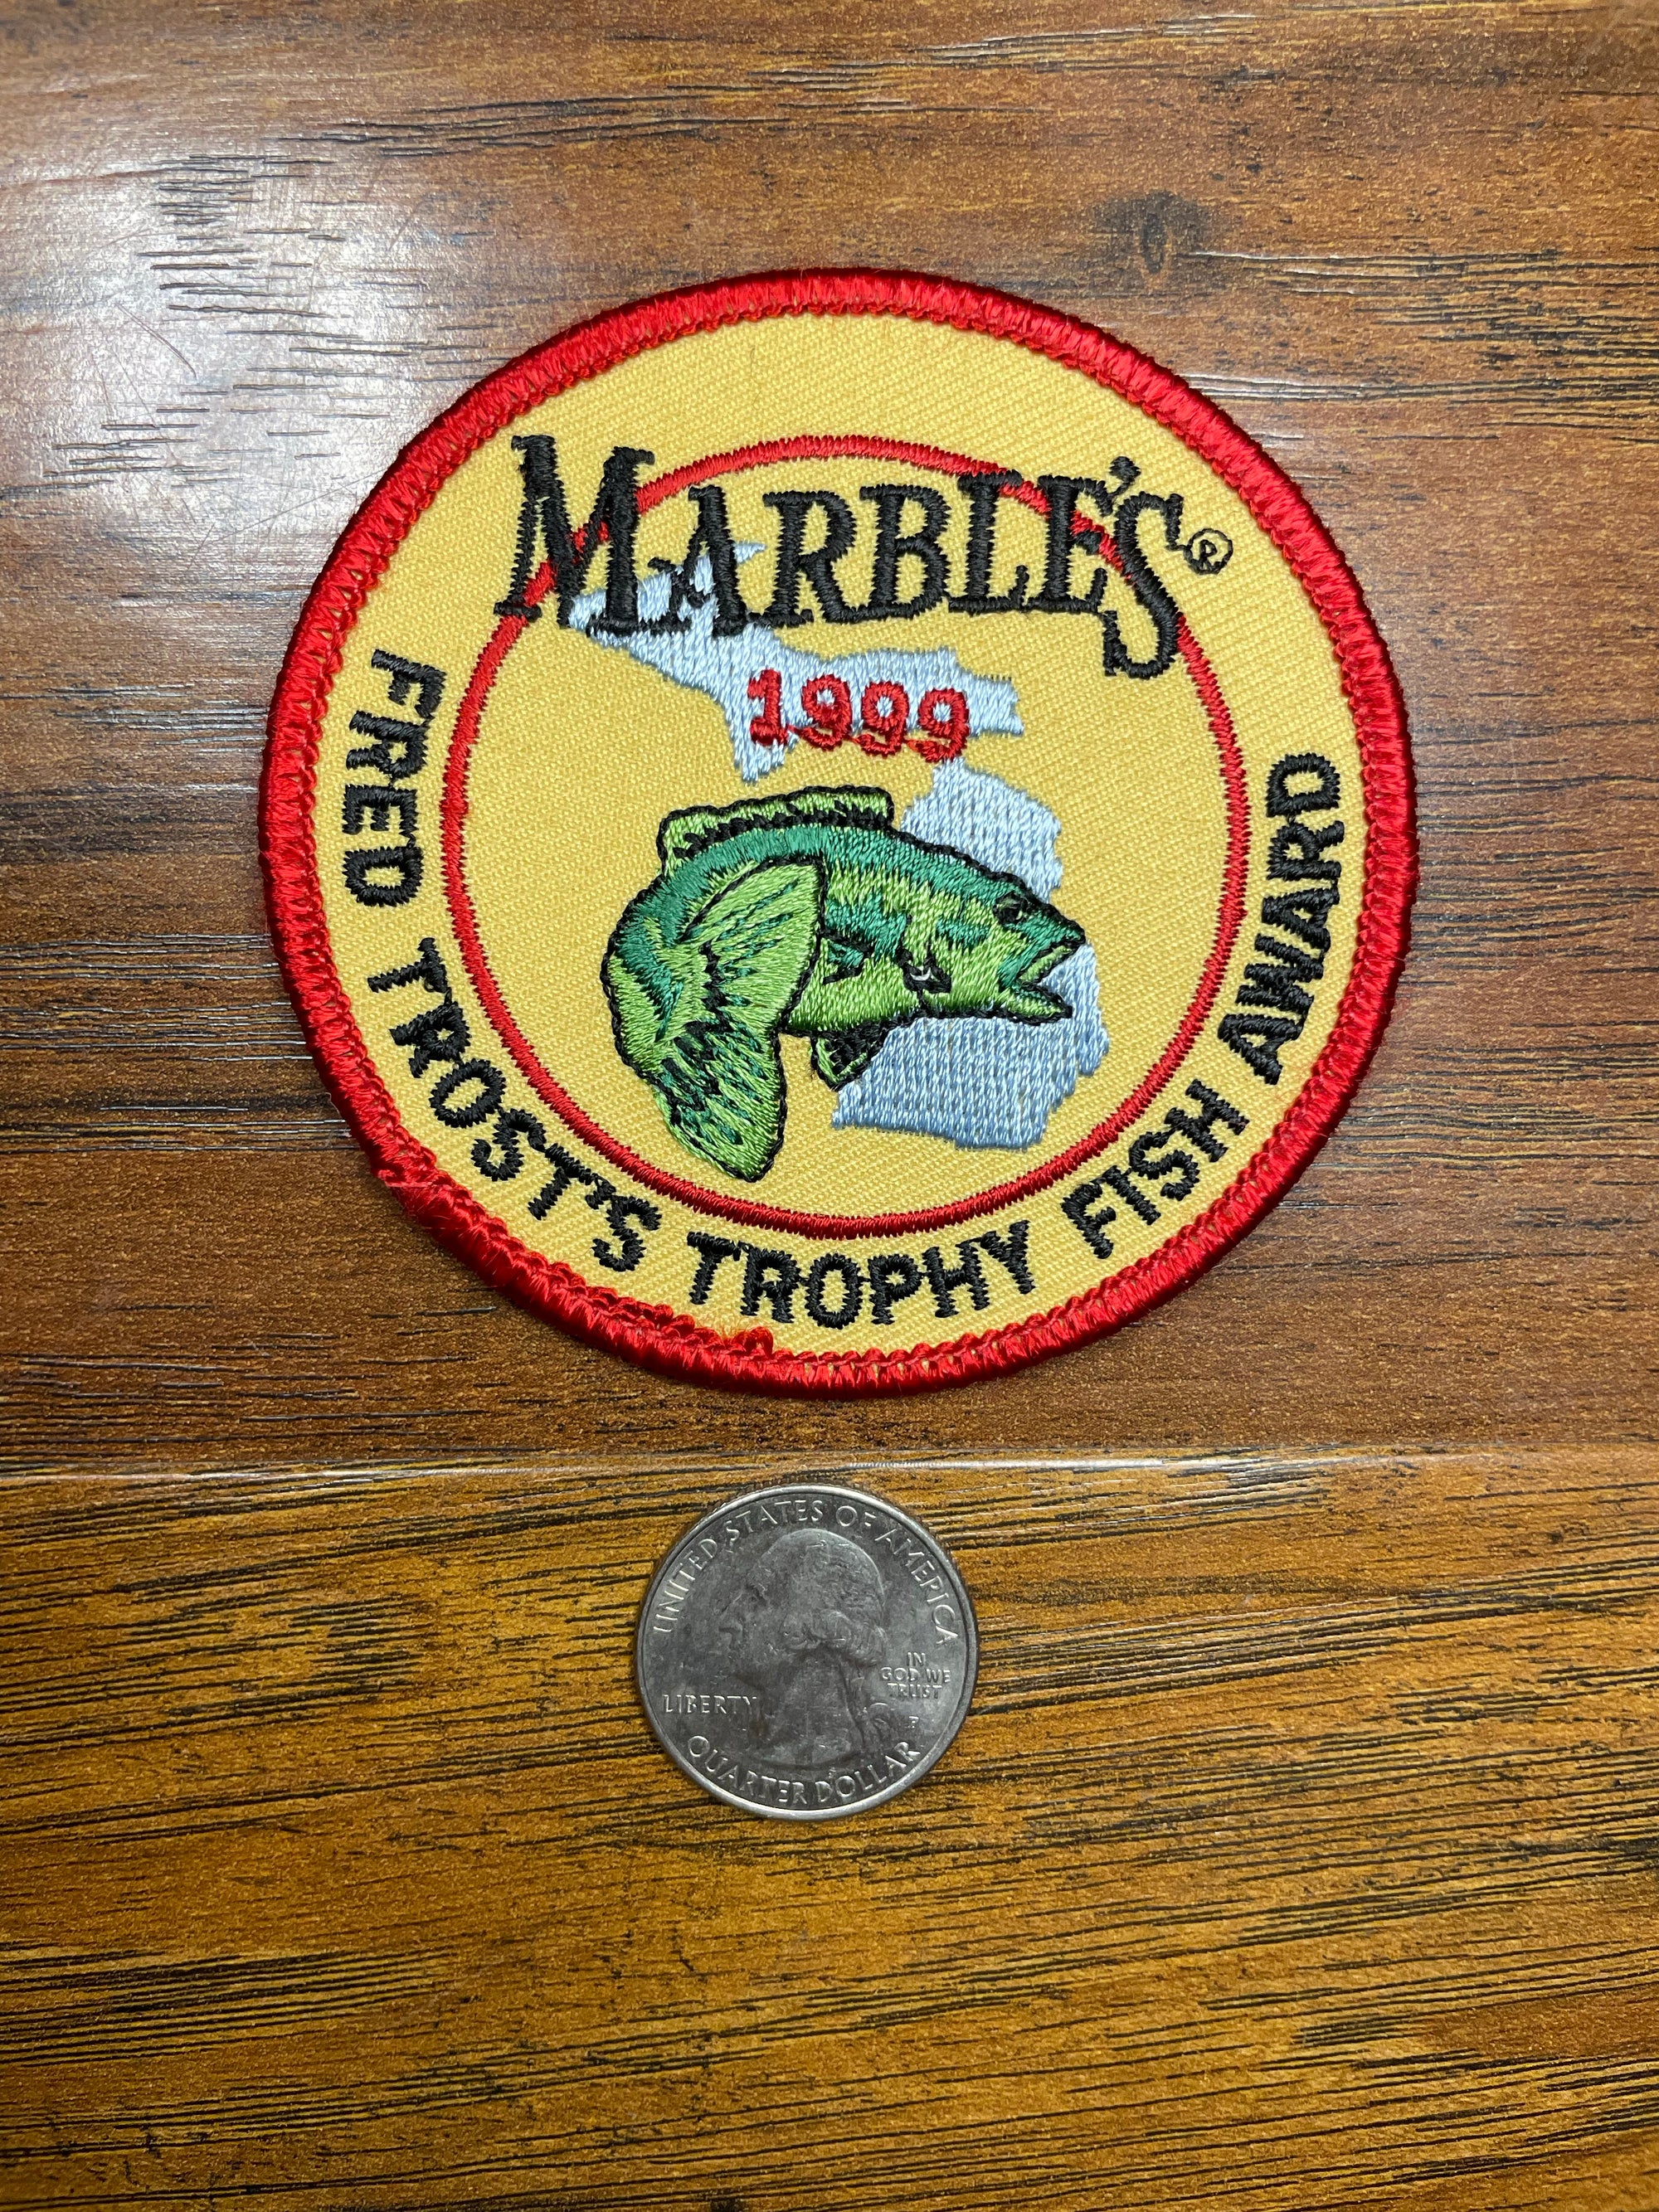 Vintage Marble’s Fred Trost’s Trophy Fish Award